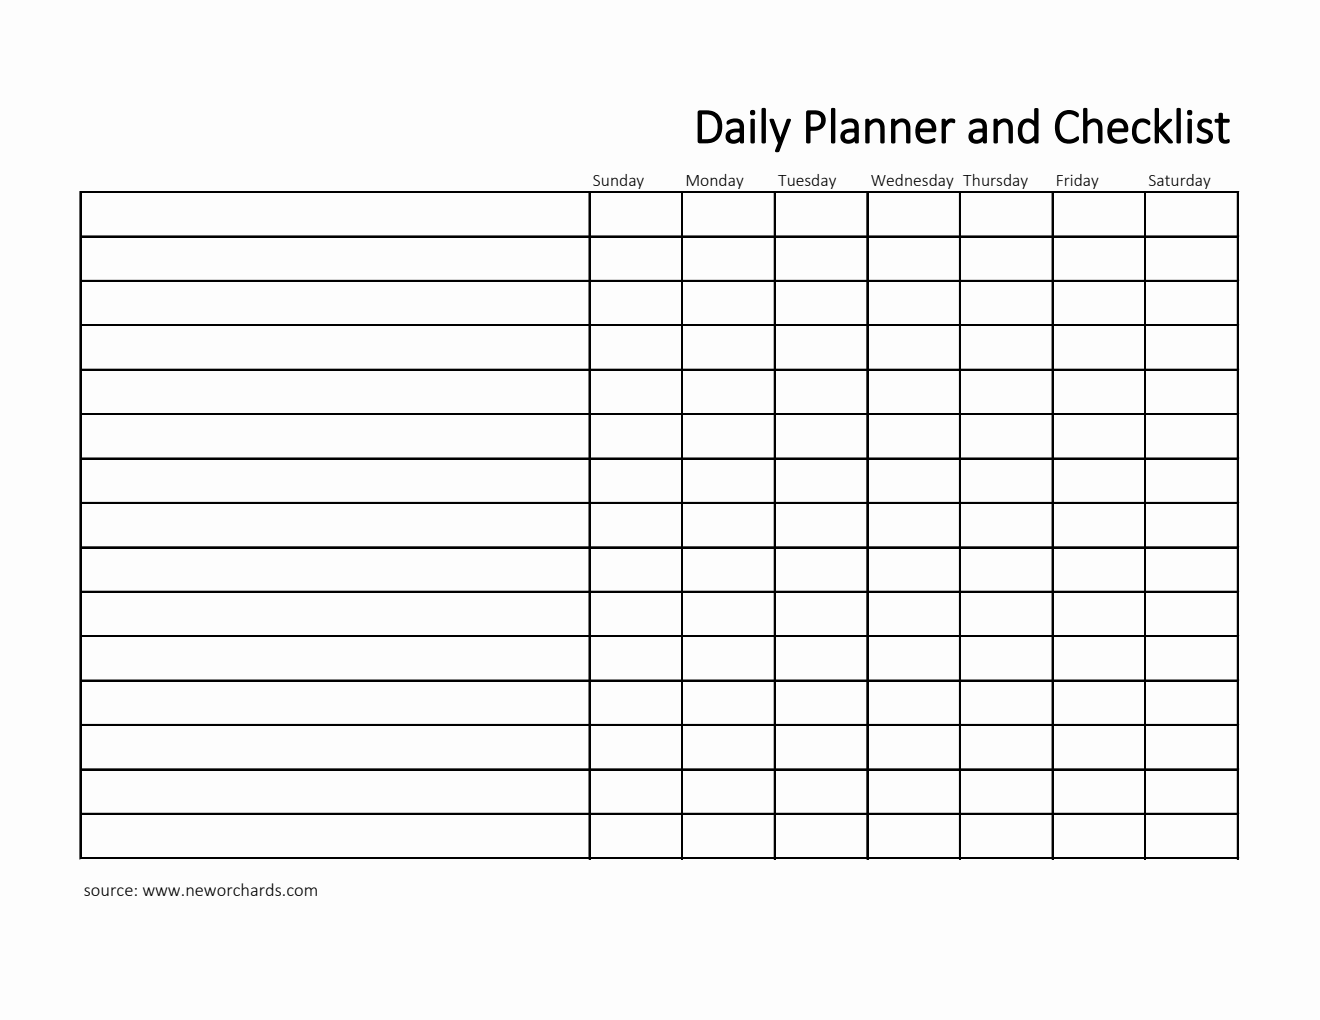 Daily Planner and Checklist Template in Excel (Printable)